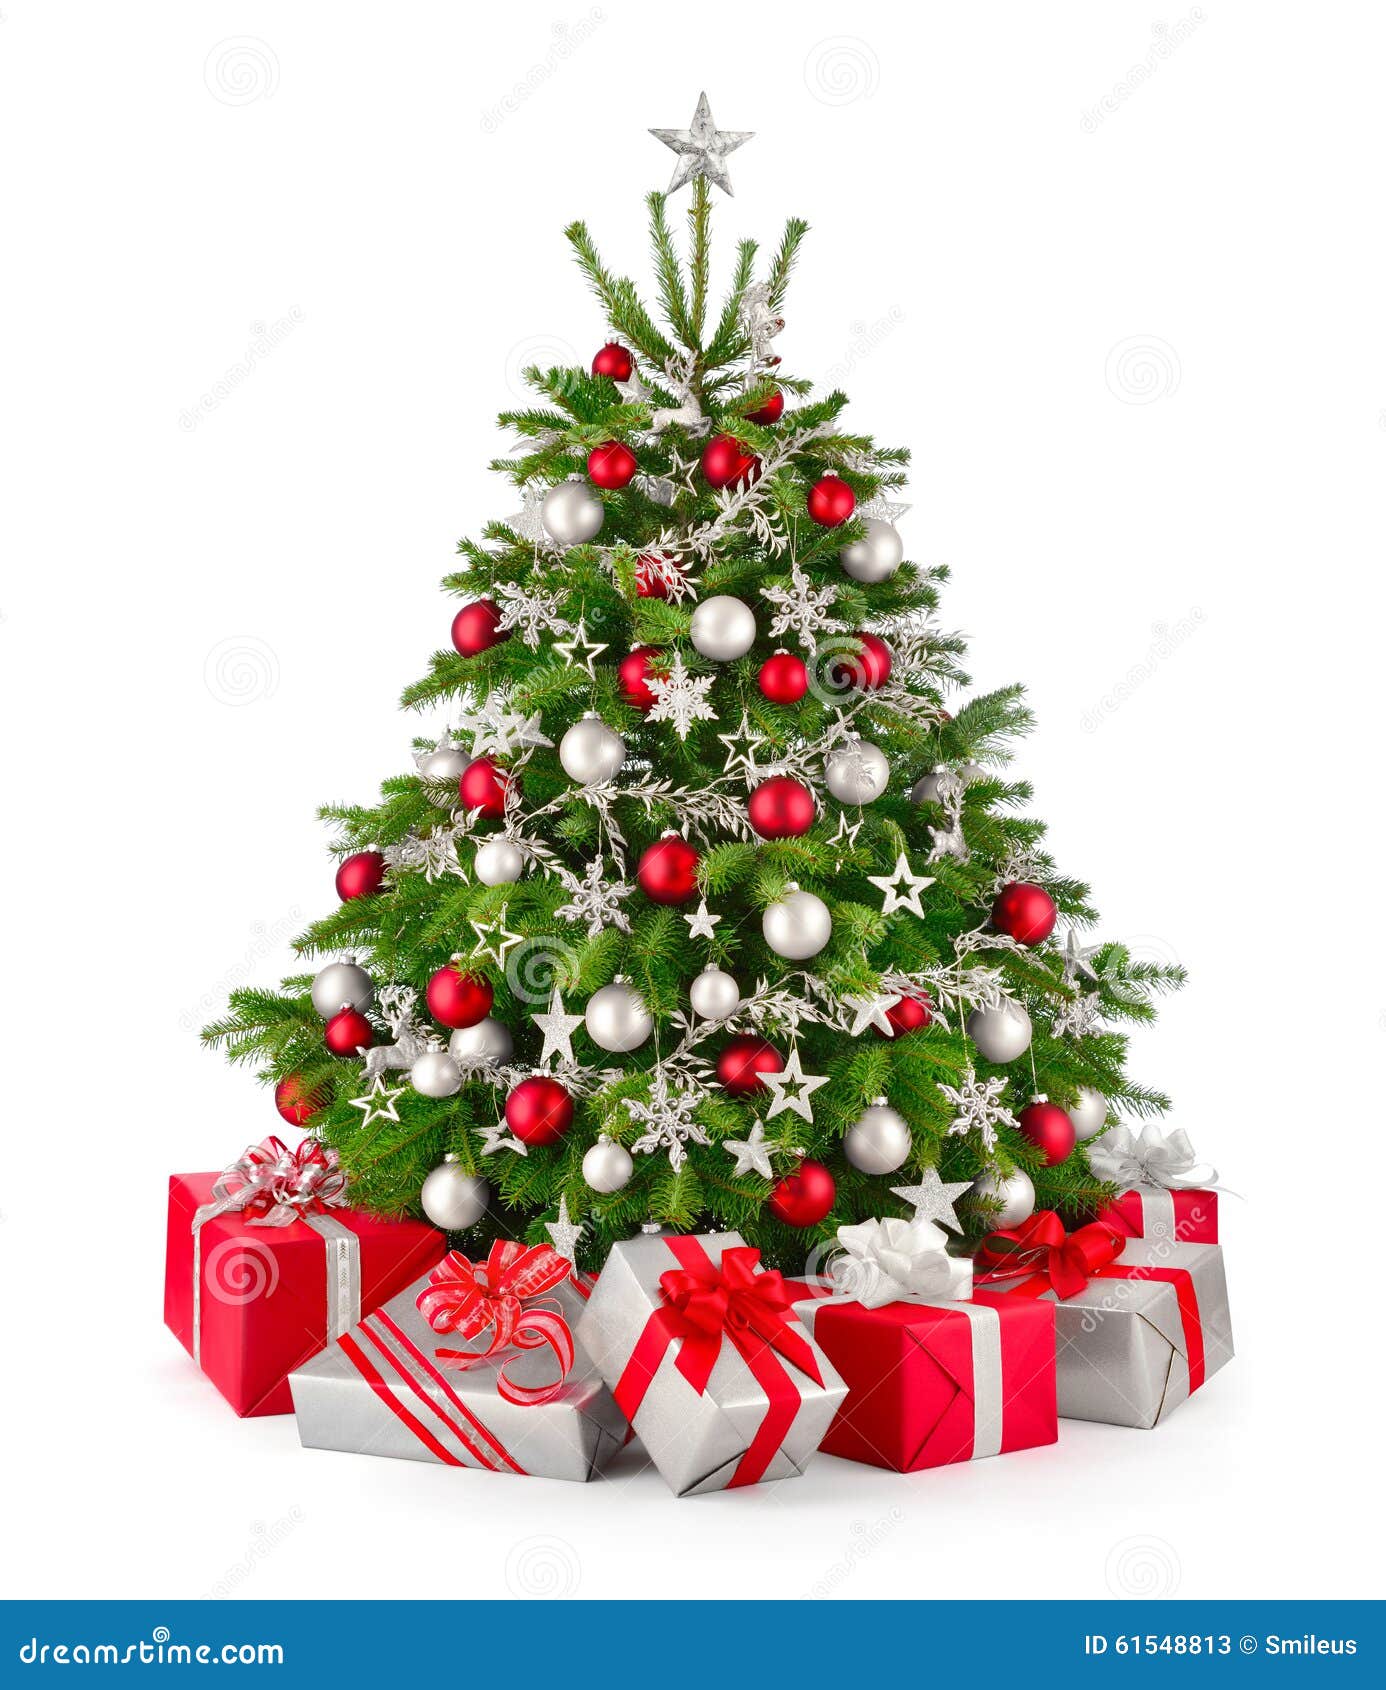 christmas tree and gifts, in red and silver